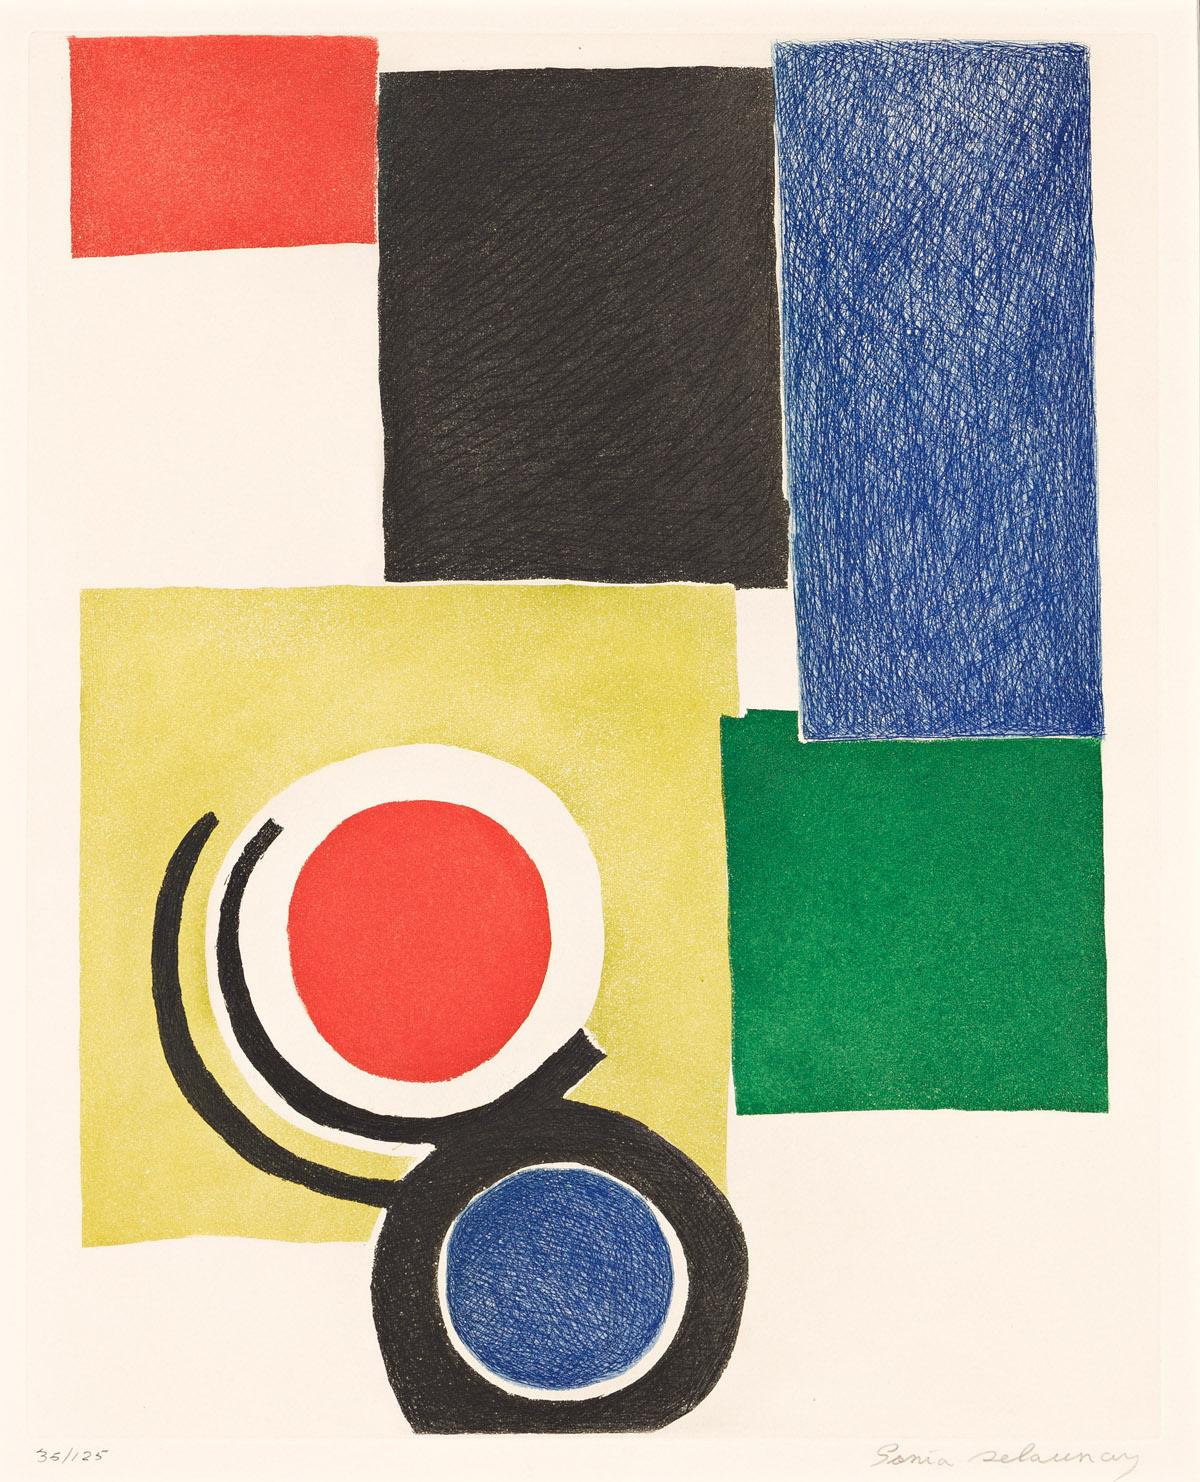 Sonia Delaunay Abstract Print - Composition polychrome